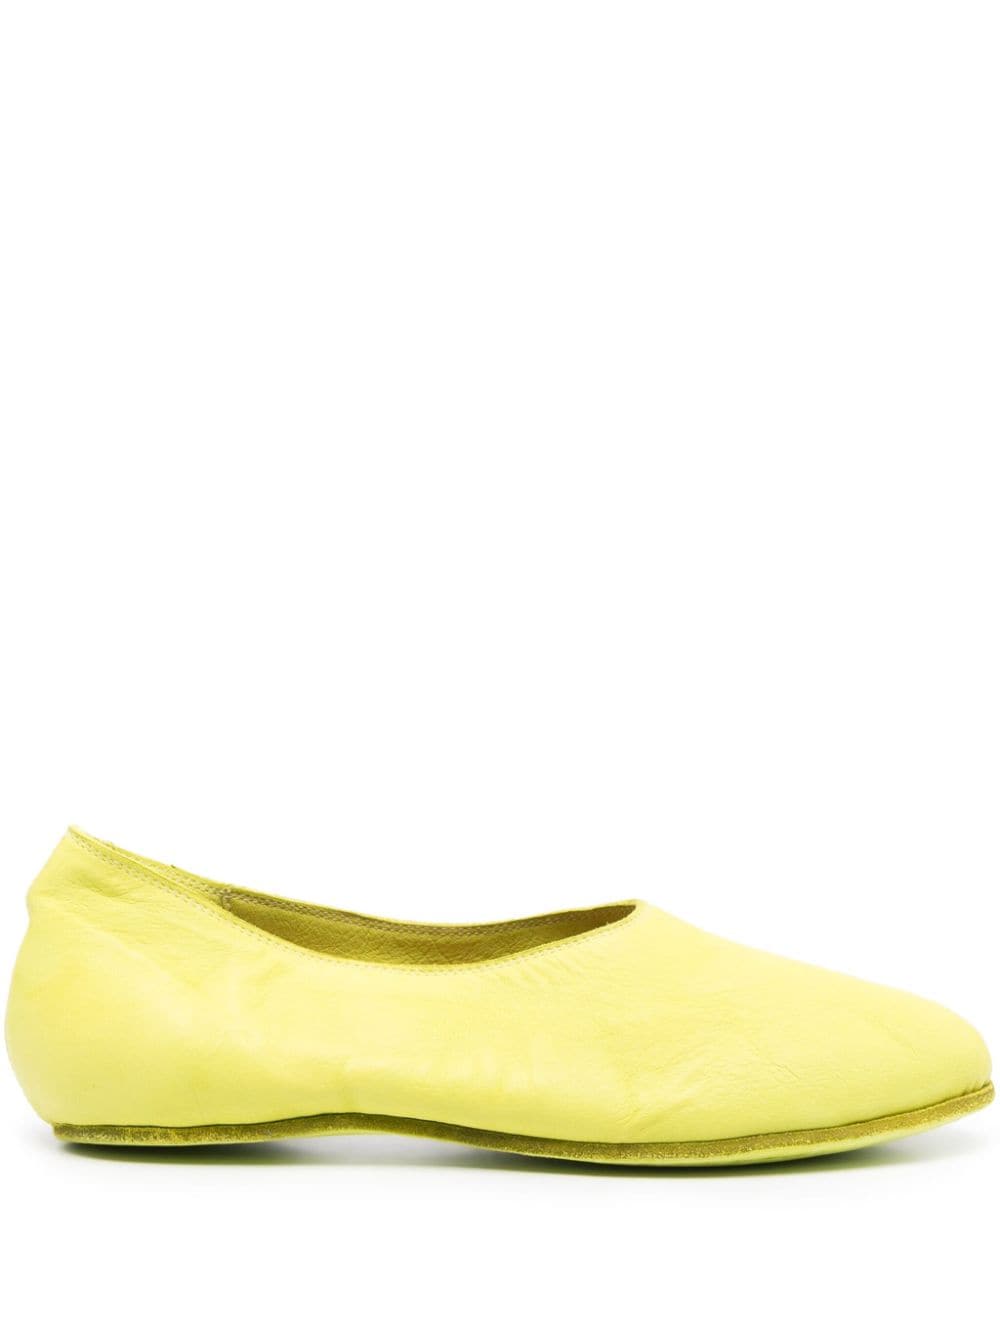 Guidi slip-on leather loafers - Verde